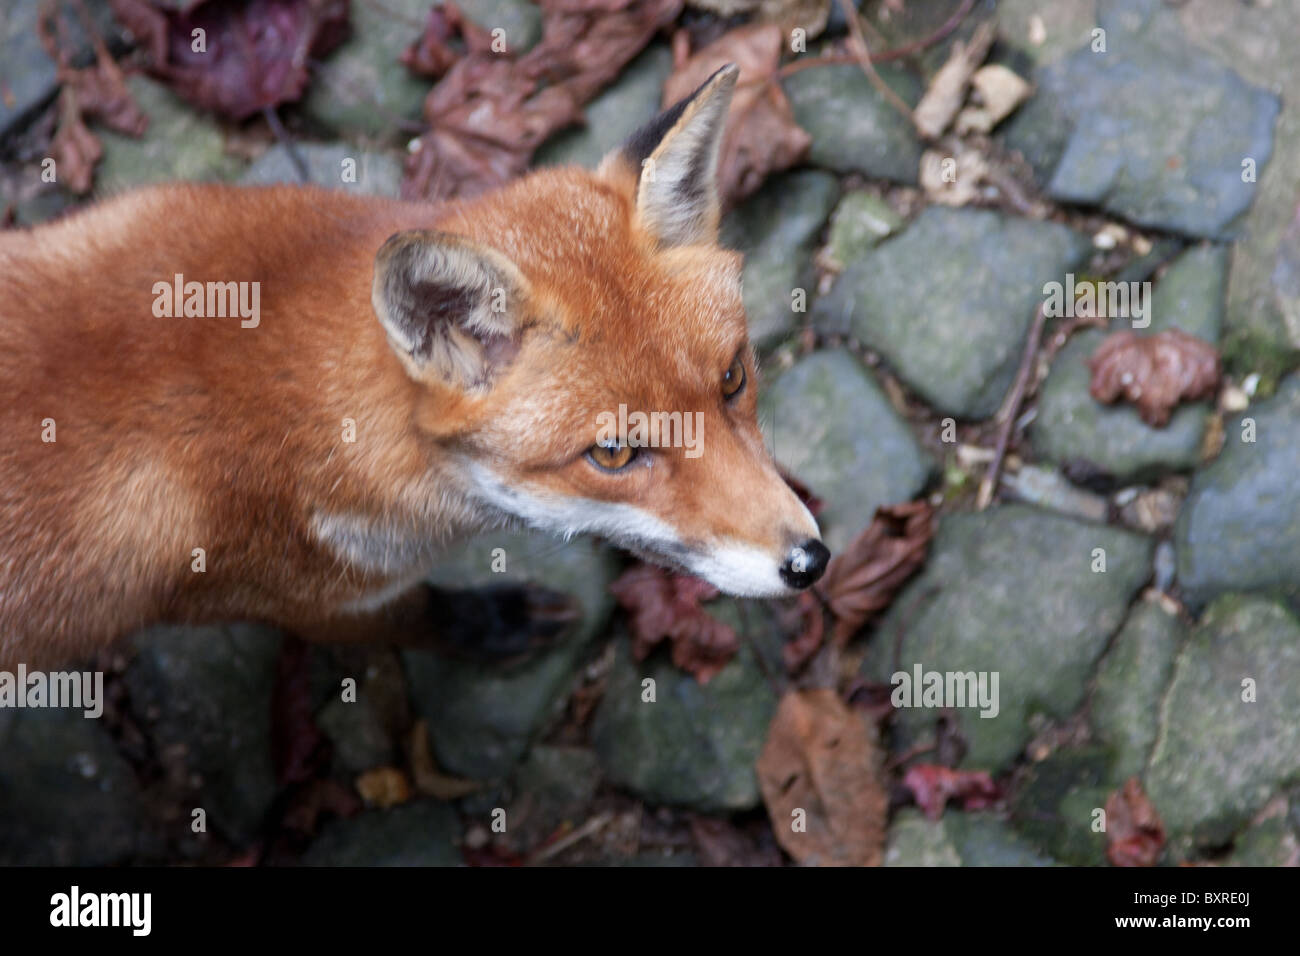 Red fox walking on stone cobbles Stock Photo